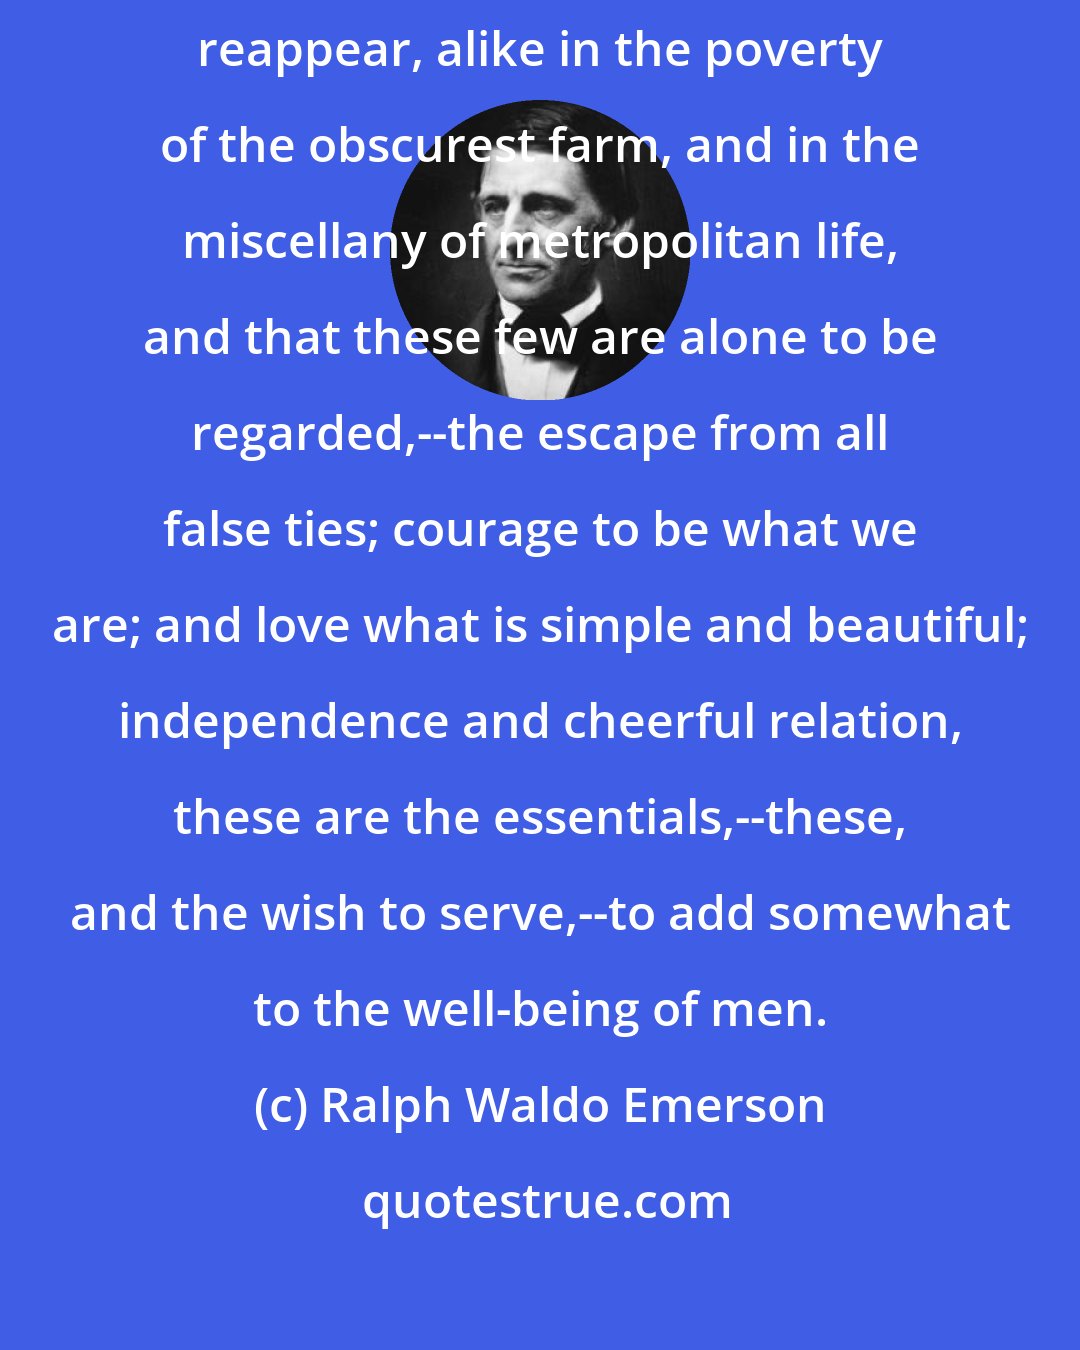 Ralph Waldo Emerson: The secret of culture is to learn, that a few great points steadily reappear, alike in the poverty of the obscurest farm, and in the miscellany of metropolitan life, and that these few are alone to be regarded,--the escape from all false ties; courage to be what we are; and love what is simple and beautiful; independence and cheerful relation, these are the essentials,--these, and the wish to serve,--to add somewhat to the well-being of men.